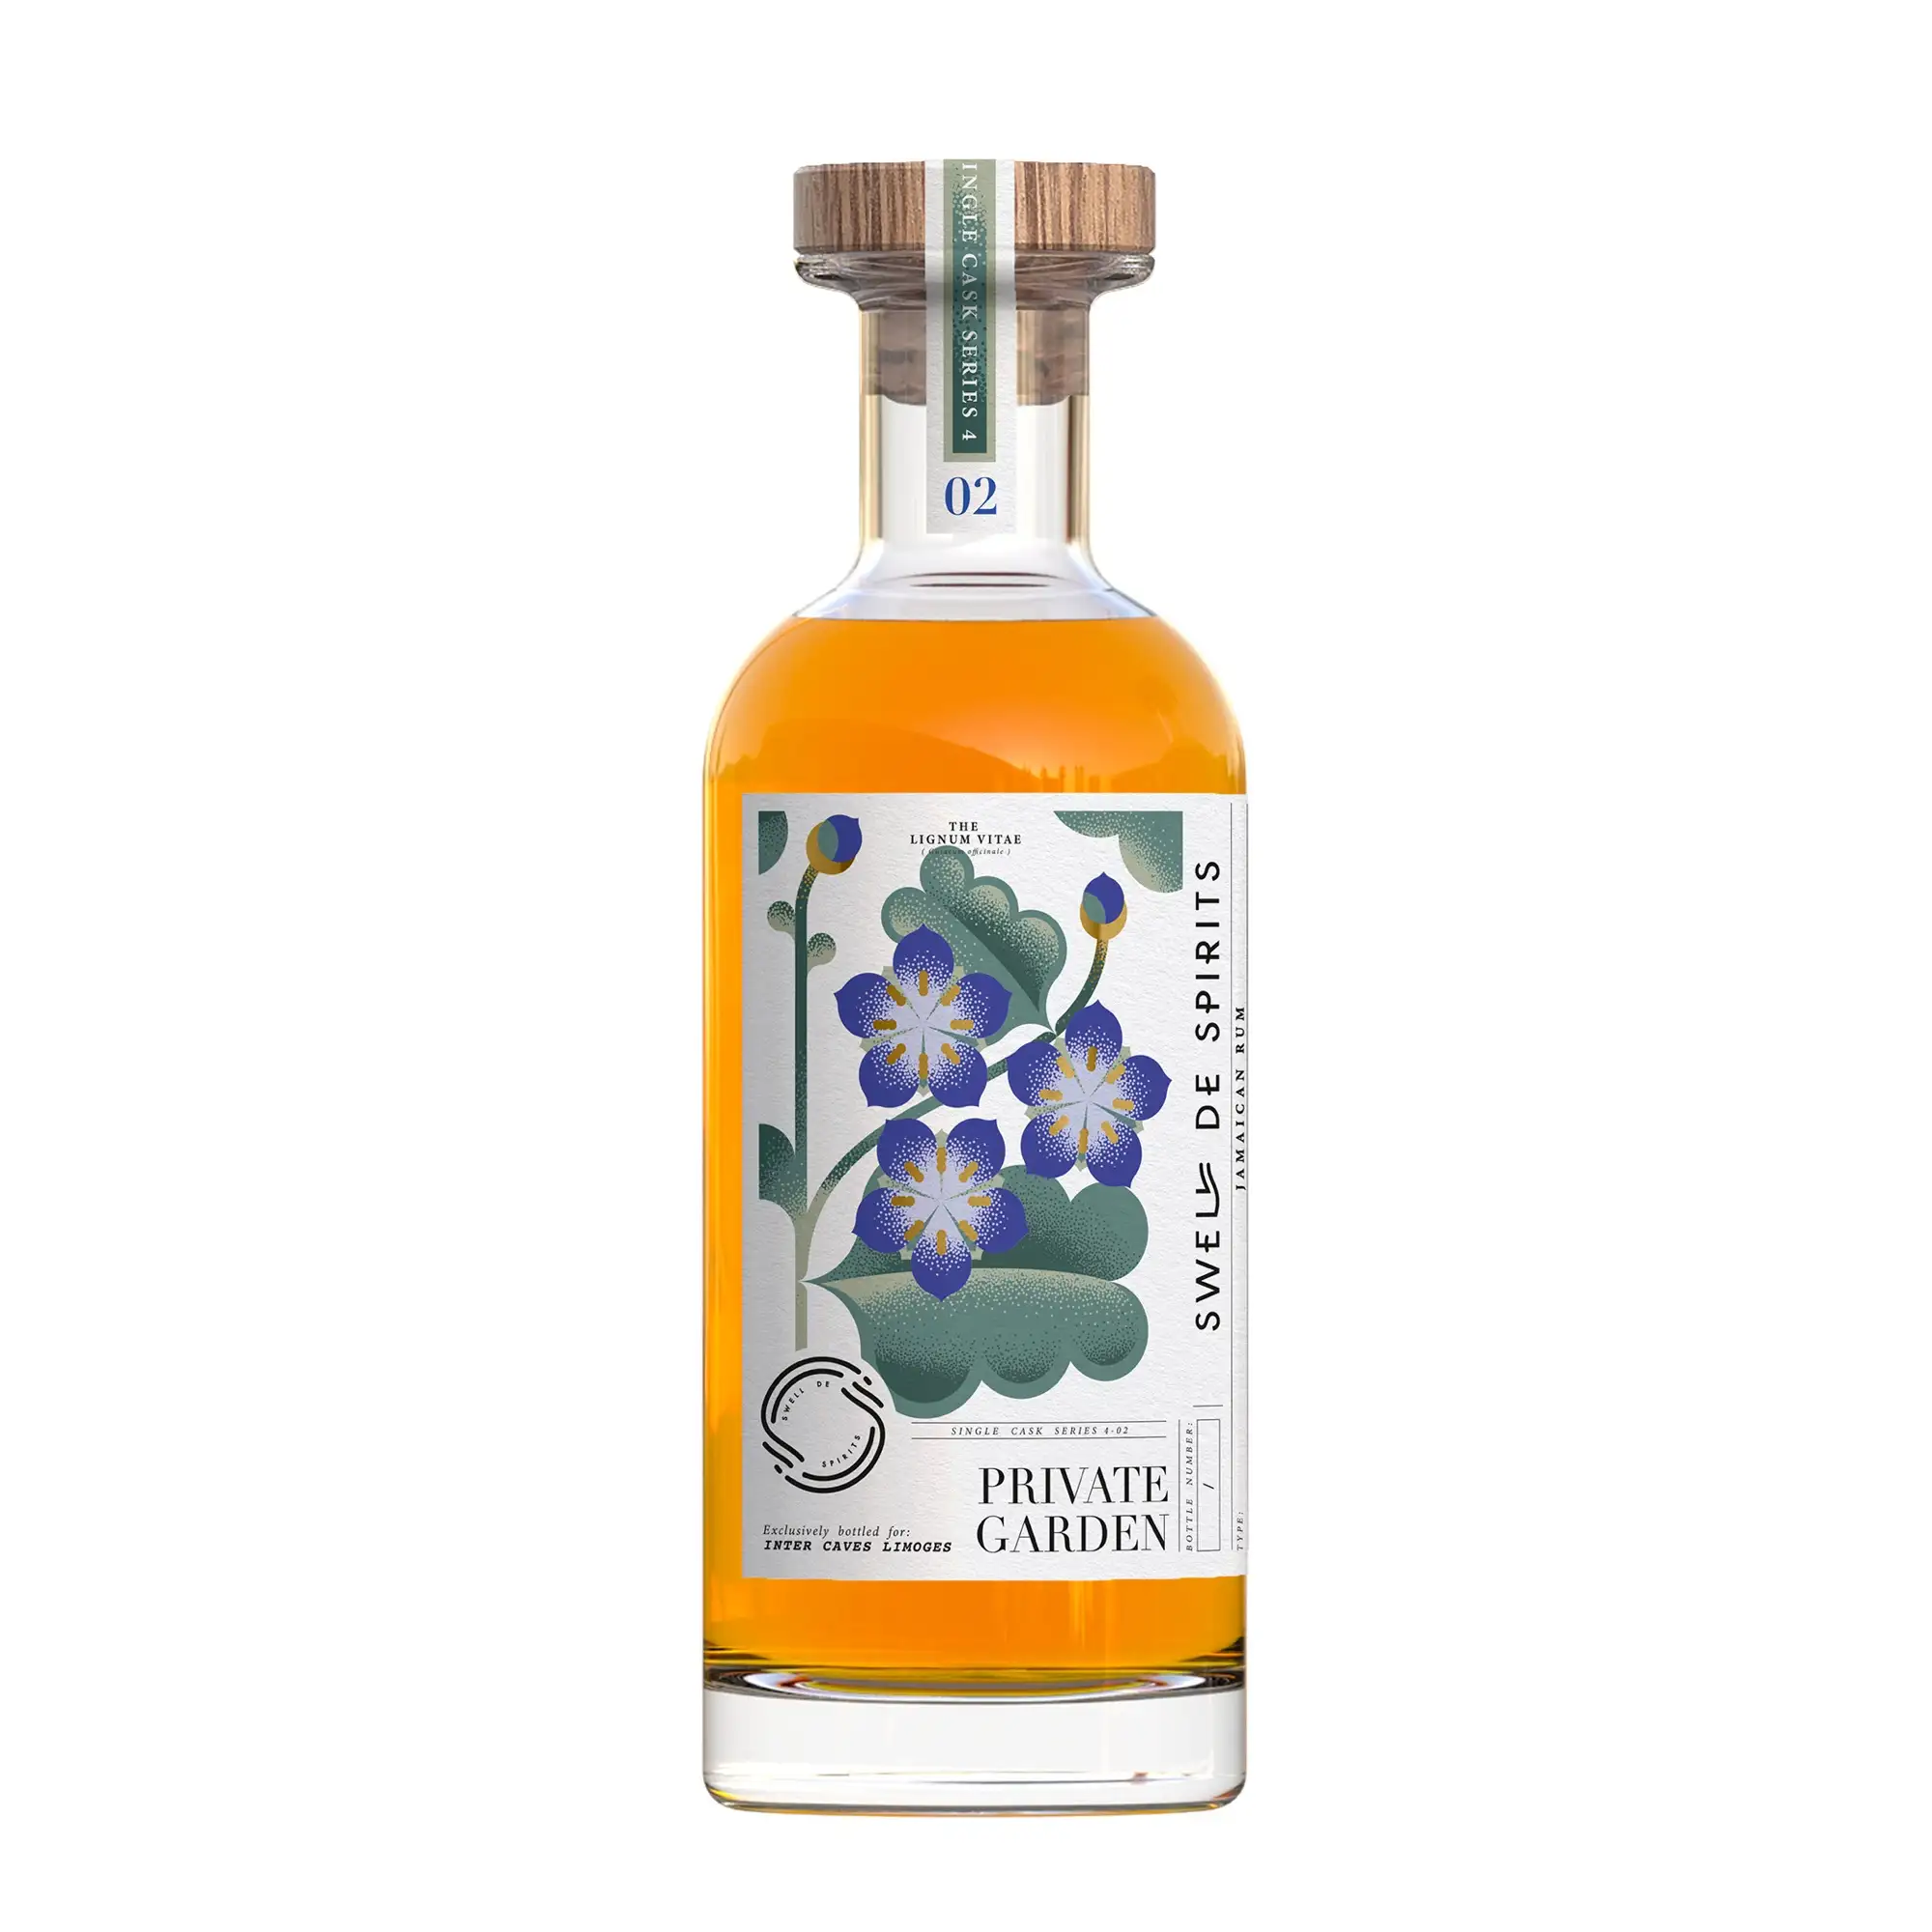 Image of the front of the bottle of the rum Private Garden No.2